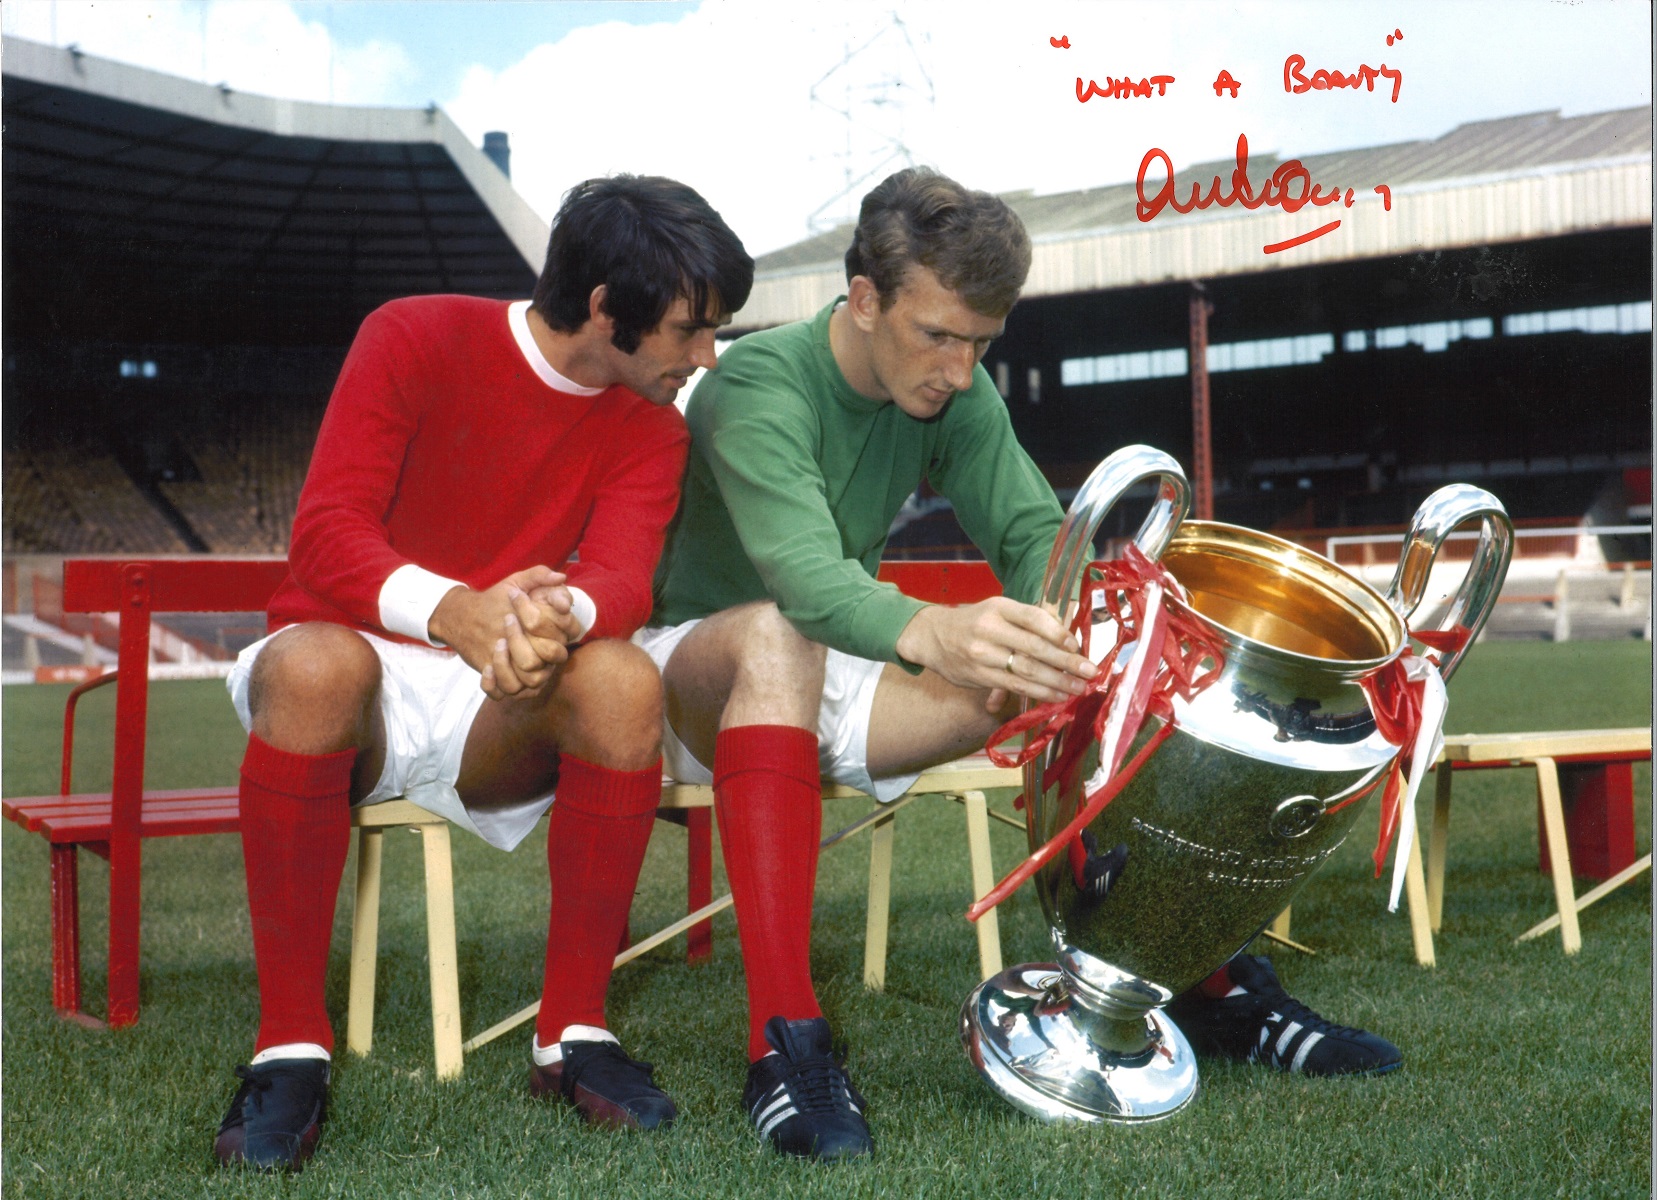 Alex Stepney Man United Signed 16 x 12 inch football photo. . All autographs are genuine hand signed